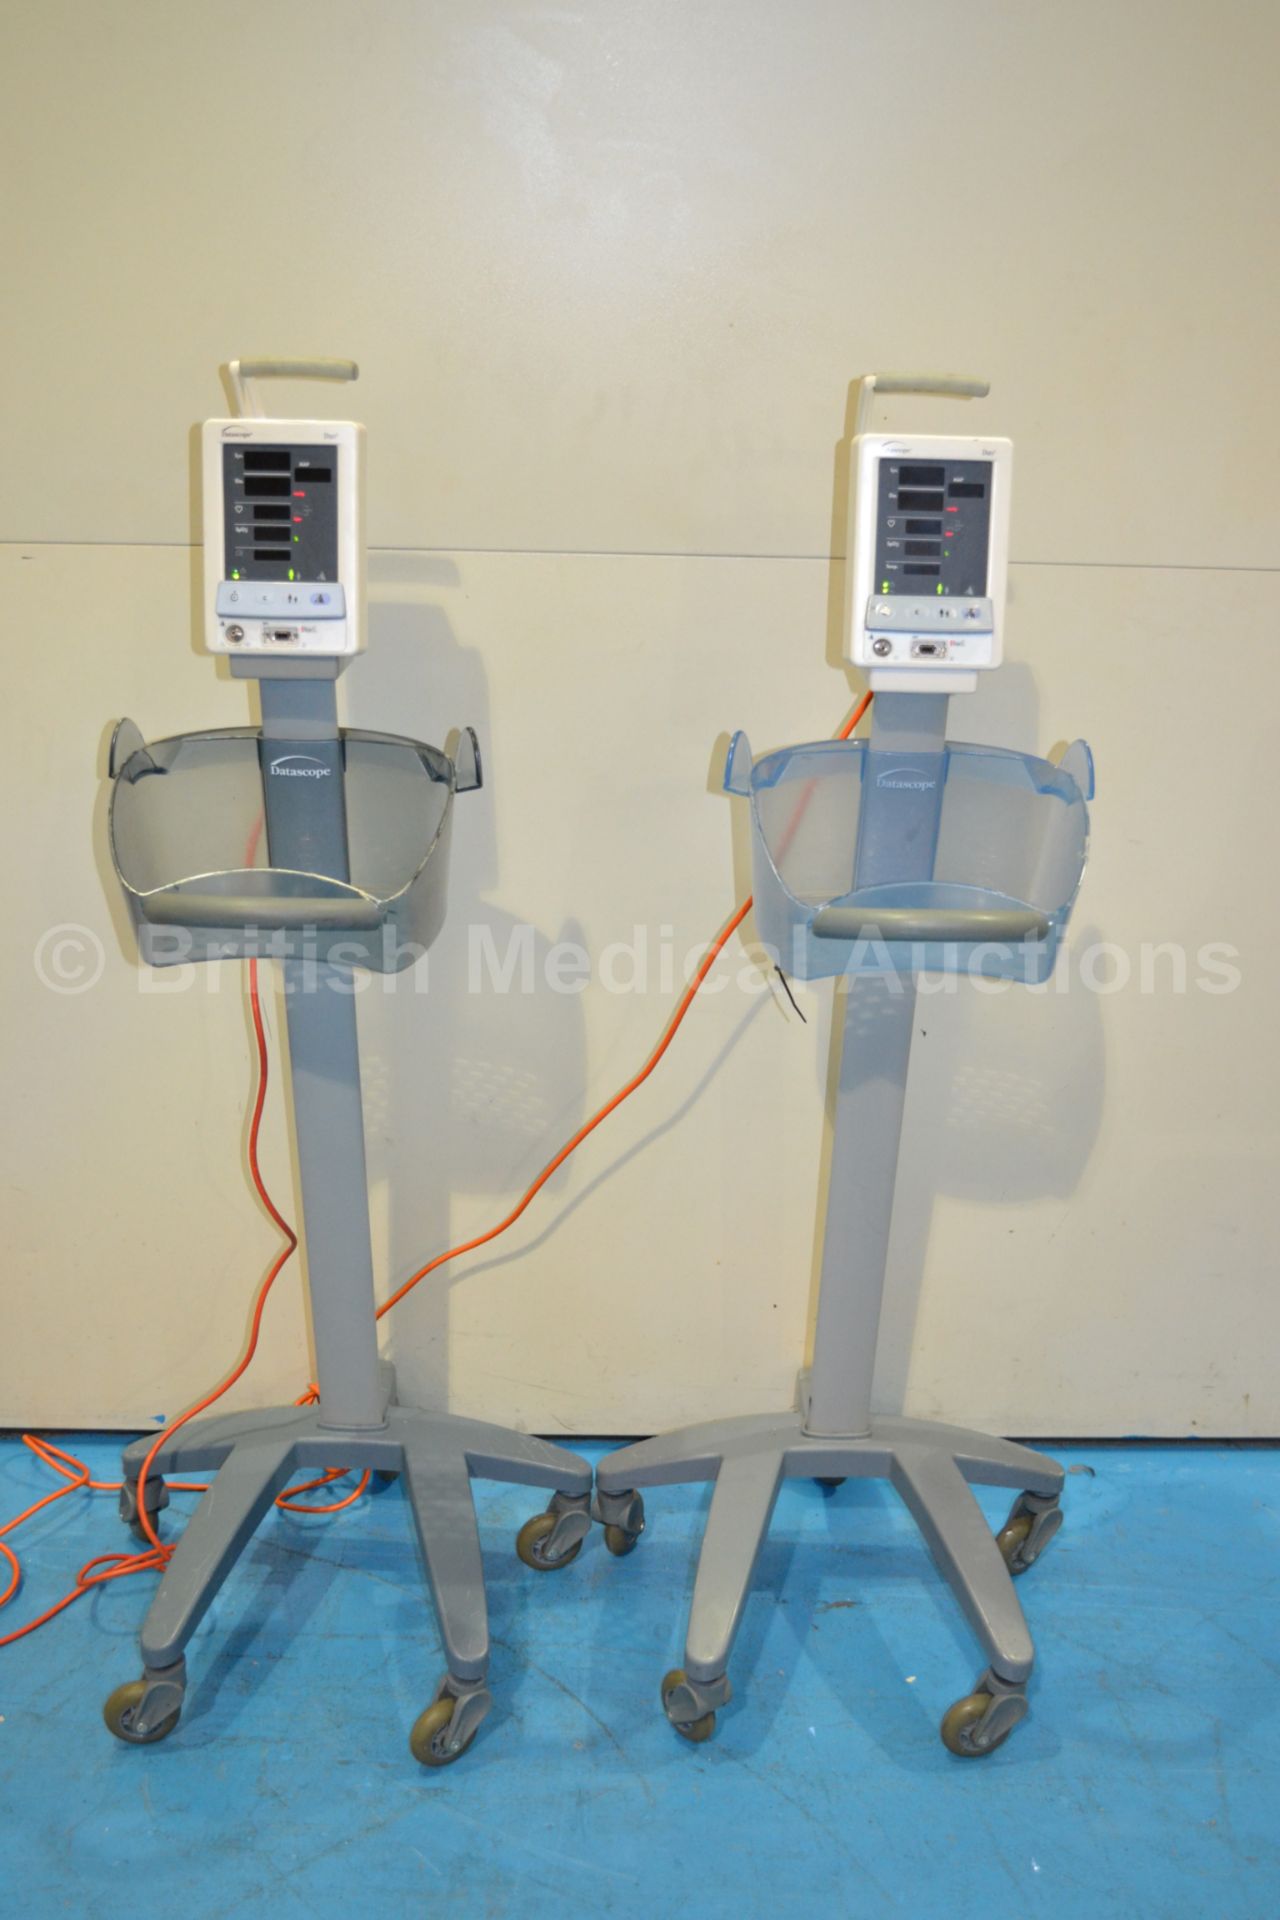 2x DataScope DUO Vital Signs Moniter on Stand (Pow